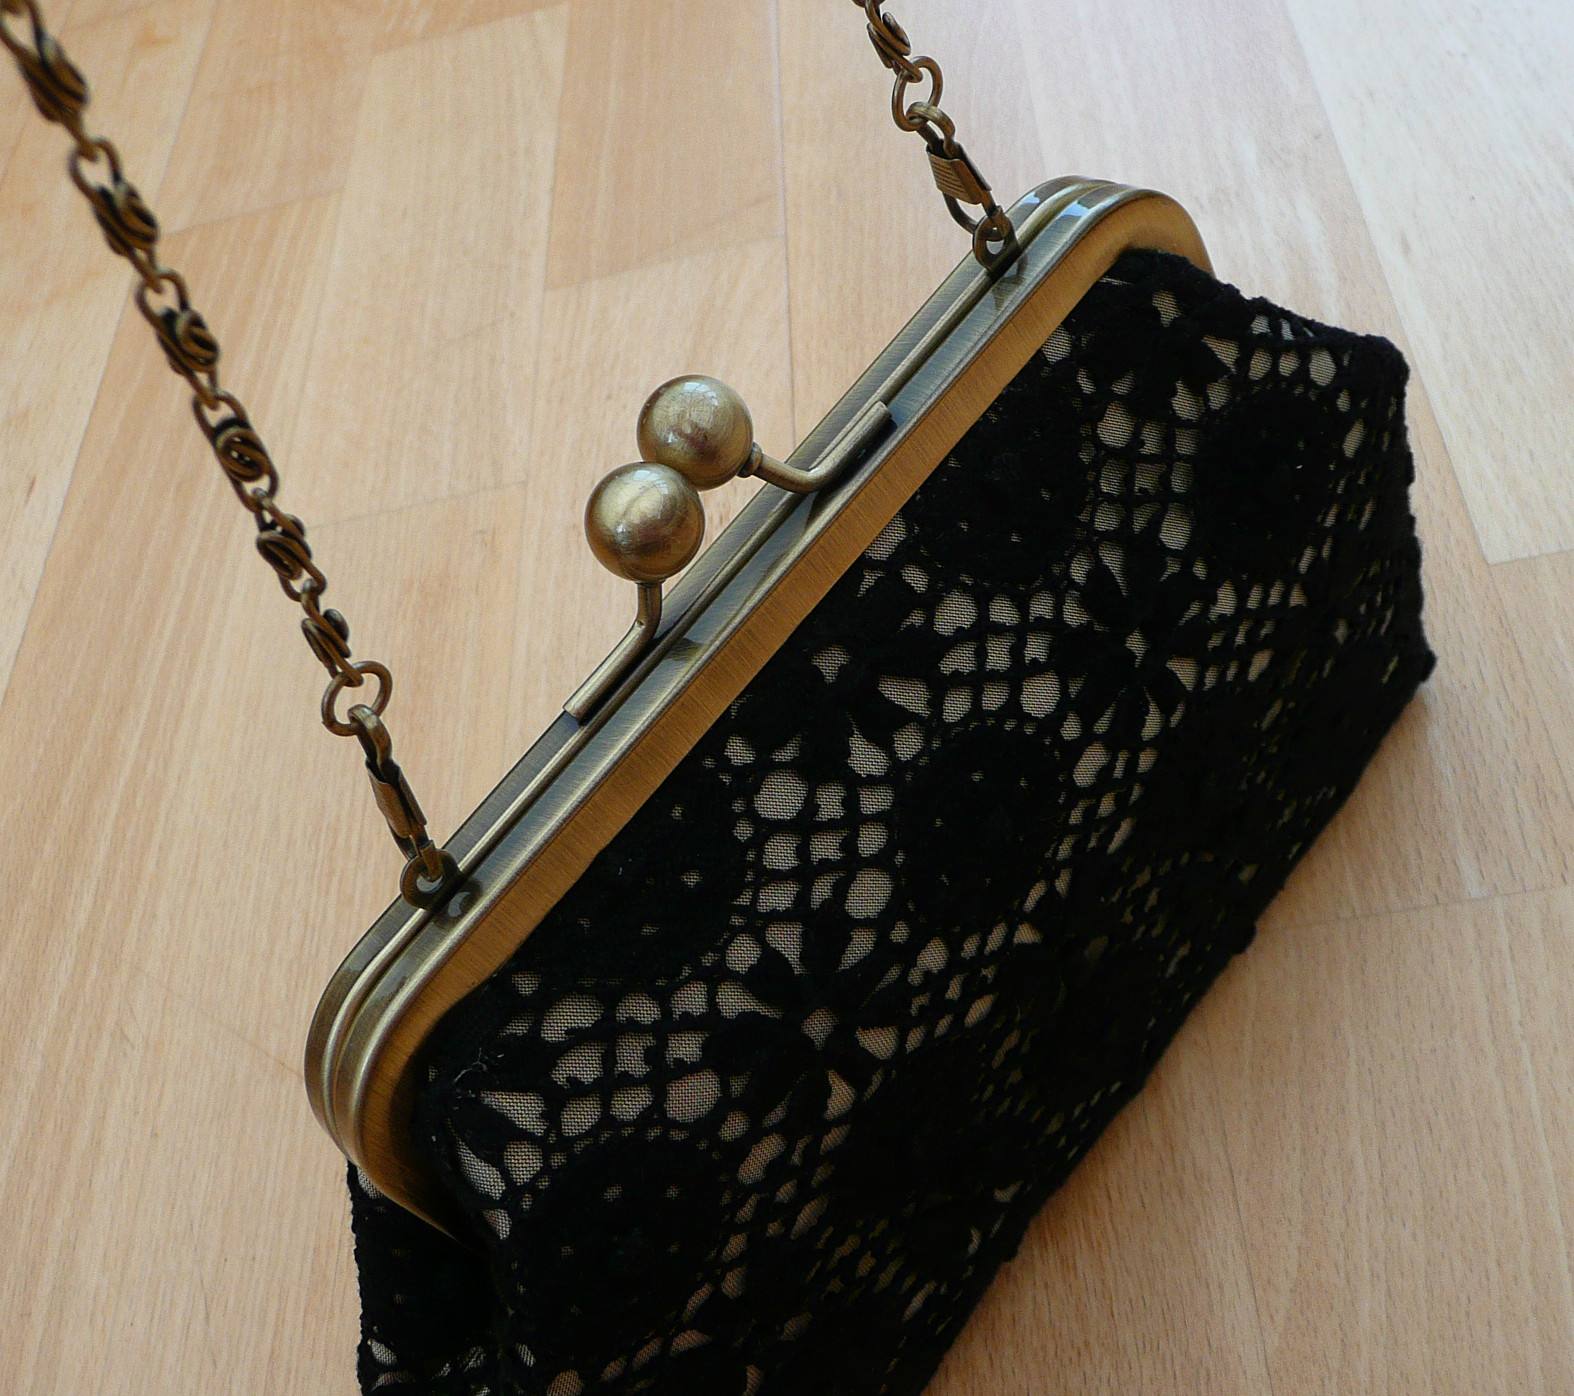 Nottingham lace clutch purse with silk lining and detachable chain strap